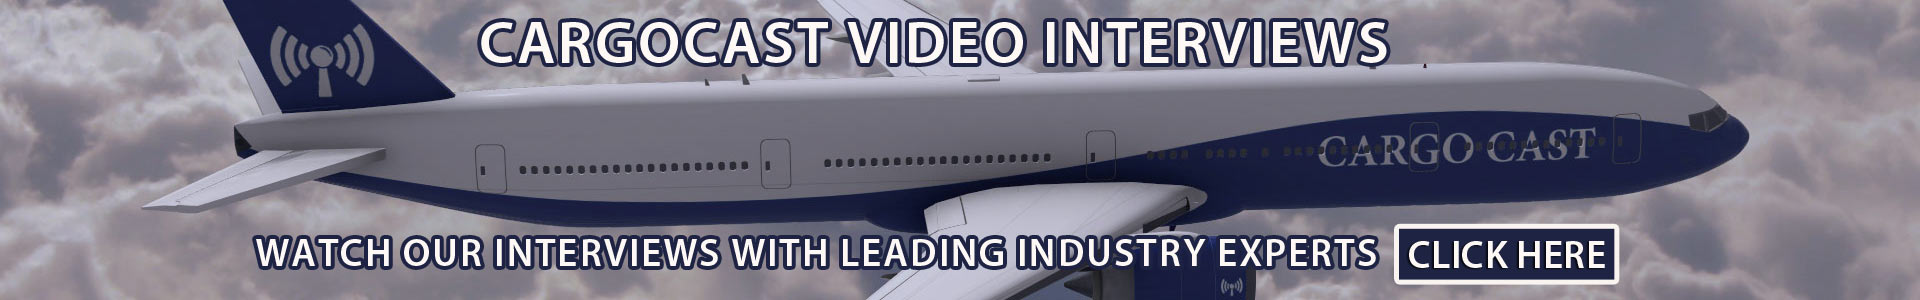 Cargocast Video Interviews with Air Cargo Industry Leaders